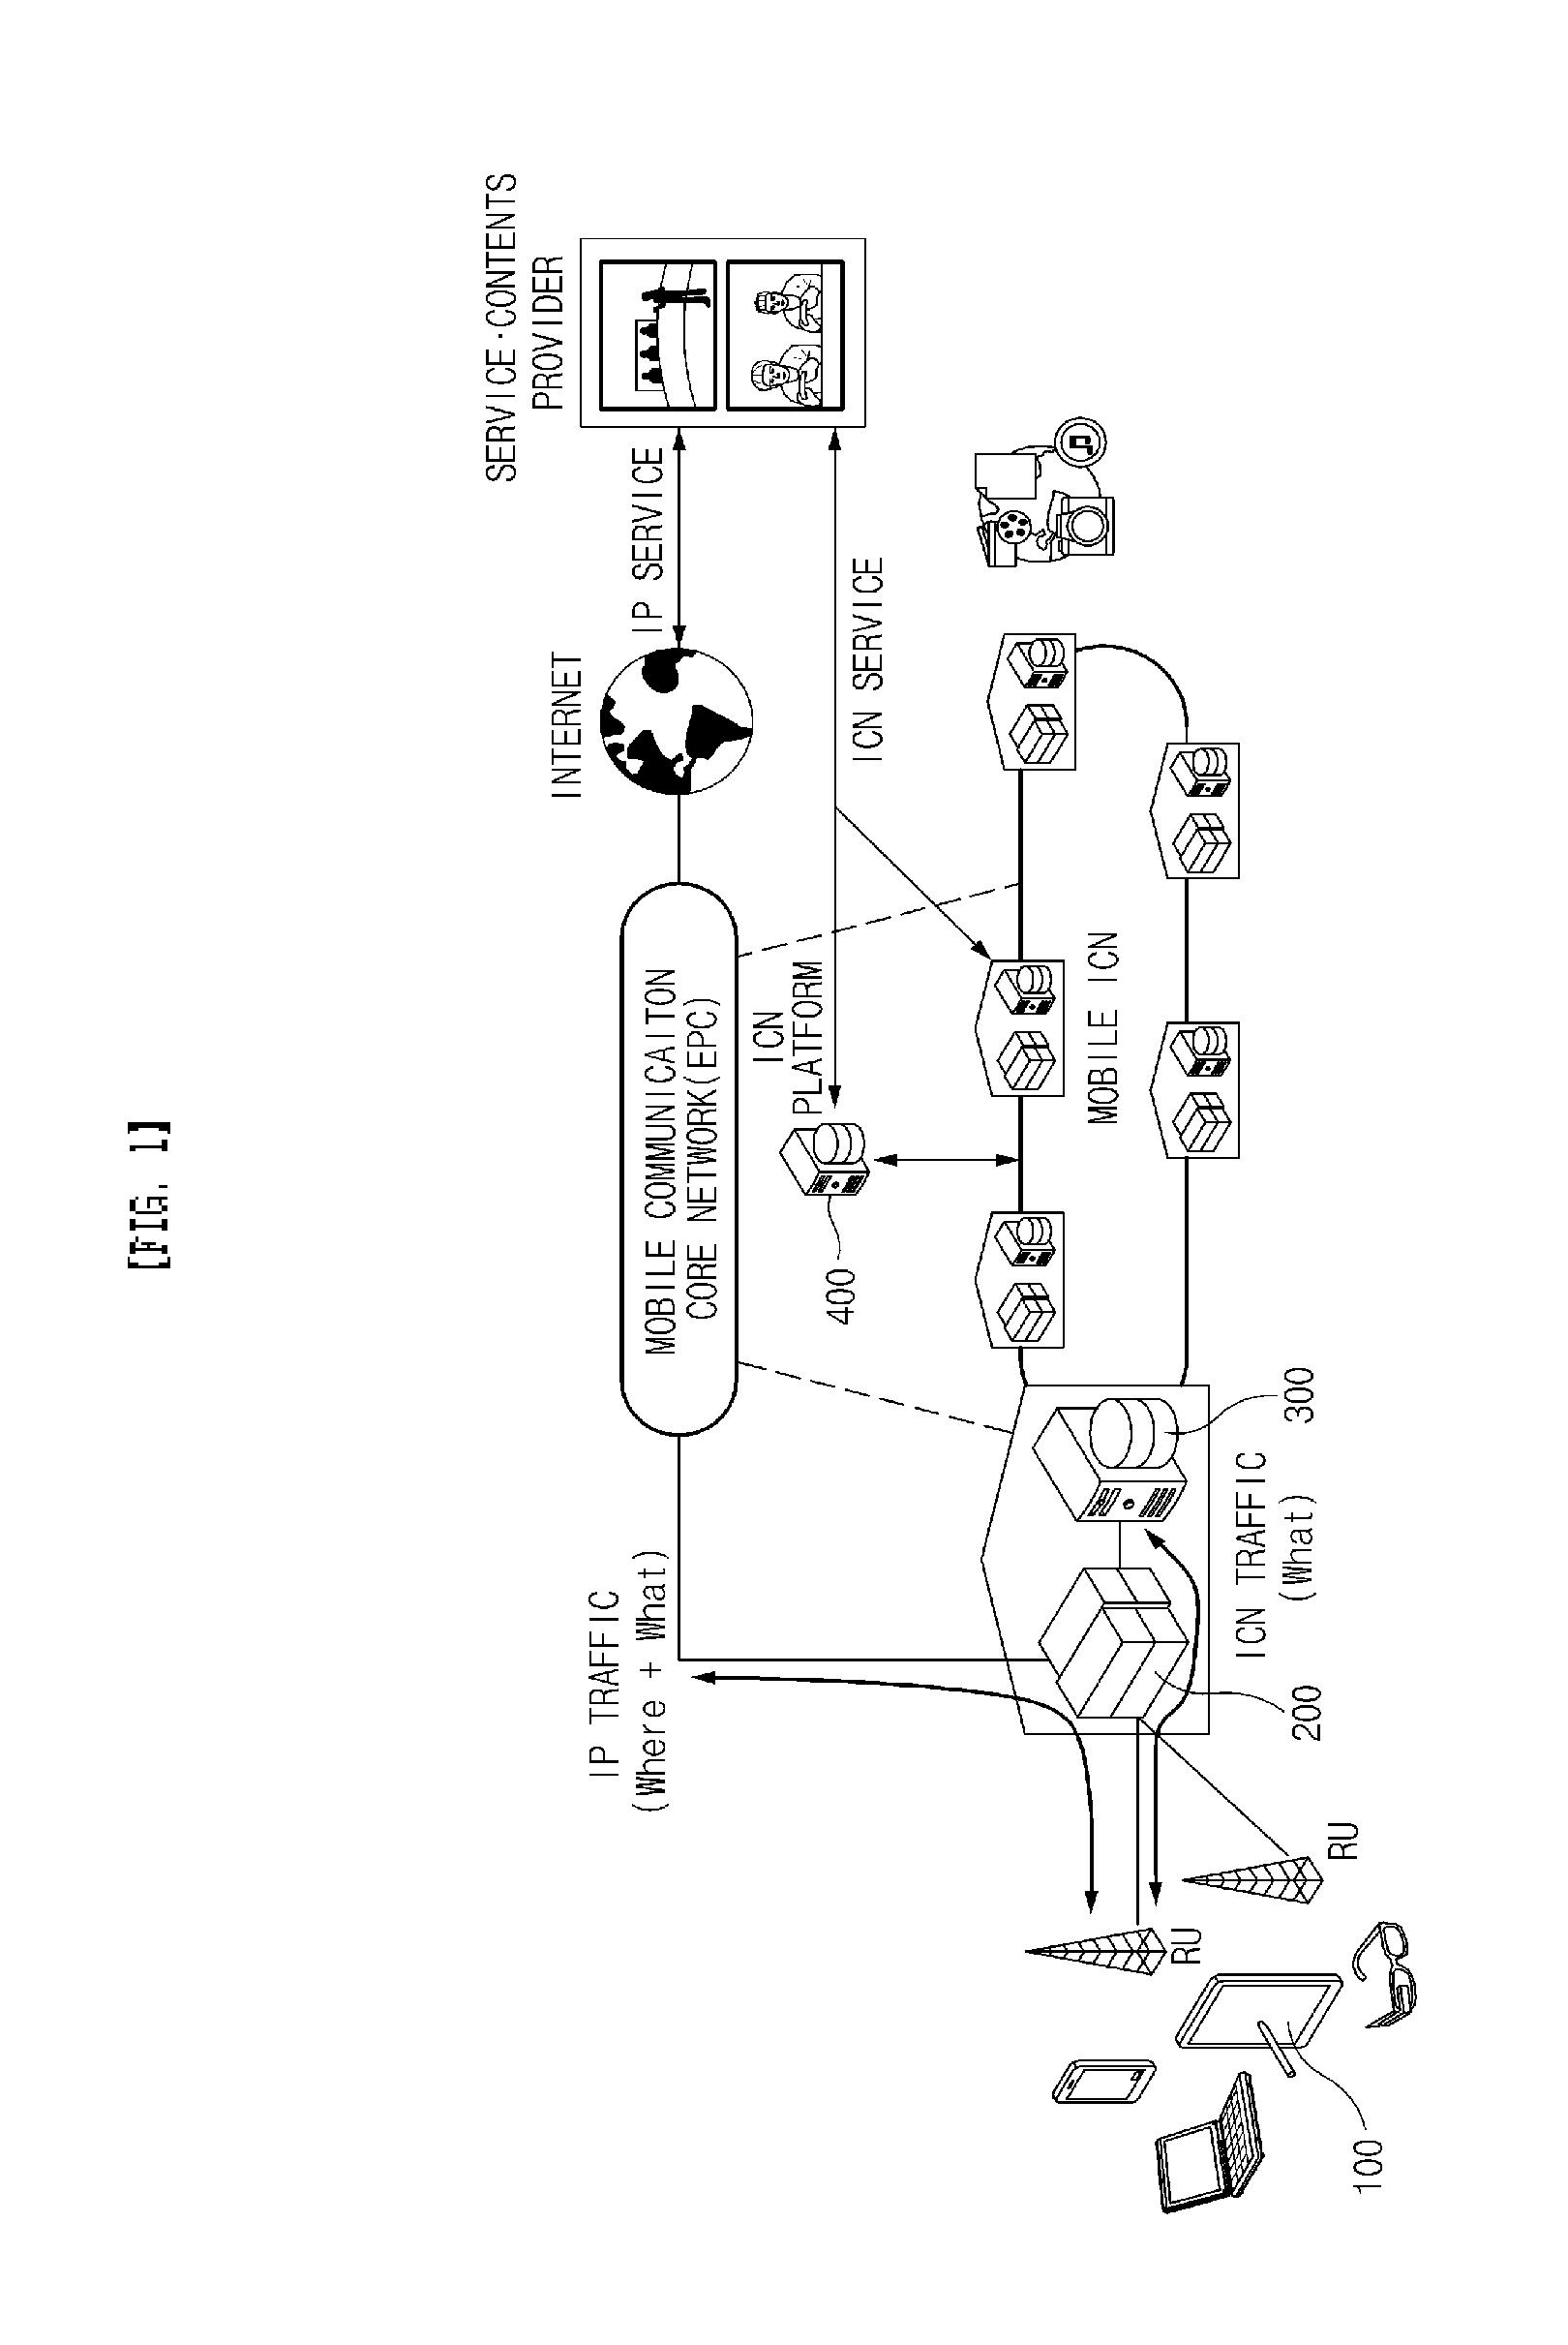 Network service system and method for providing network service in multiple mobile network environment